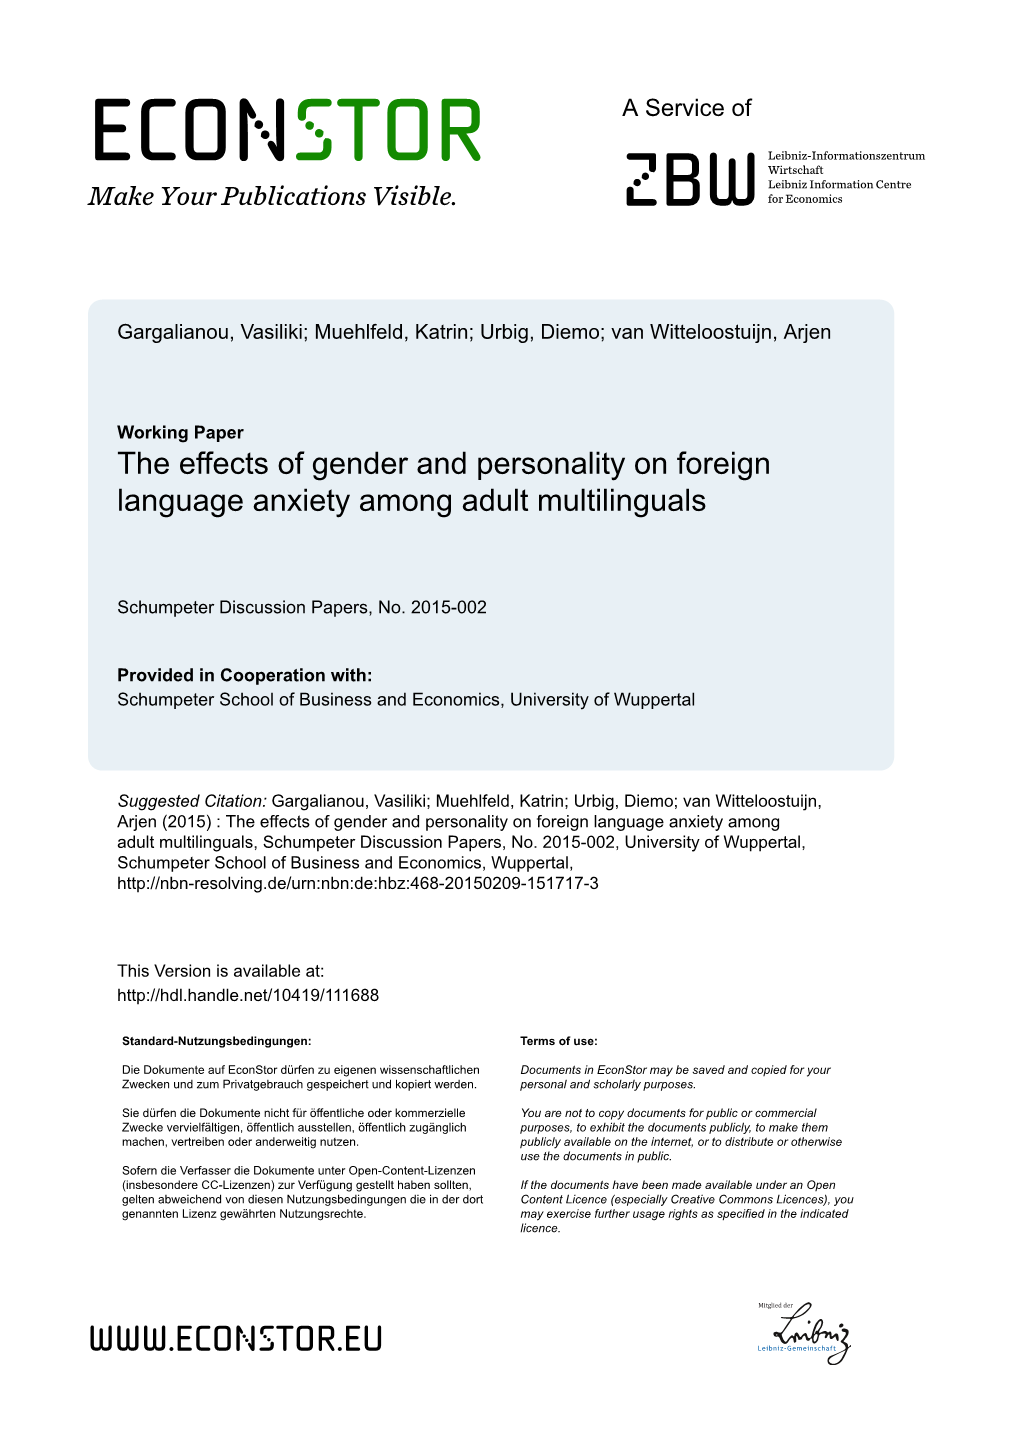 The Effects of Gender and Personality on Foreign Language Anxiety Among Adult Multilinguals